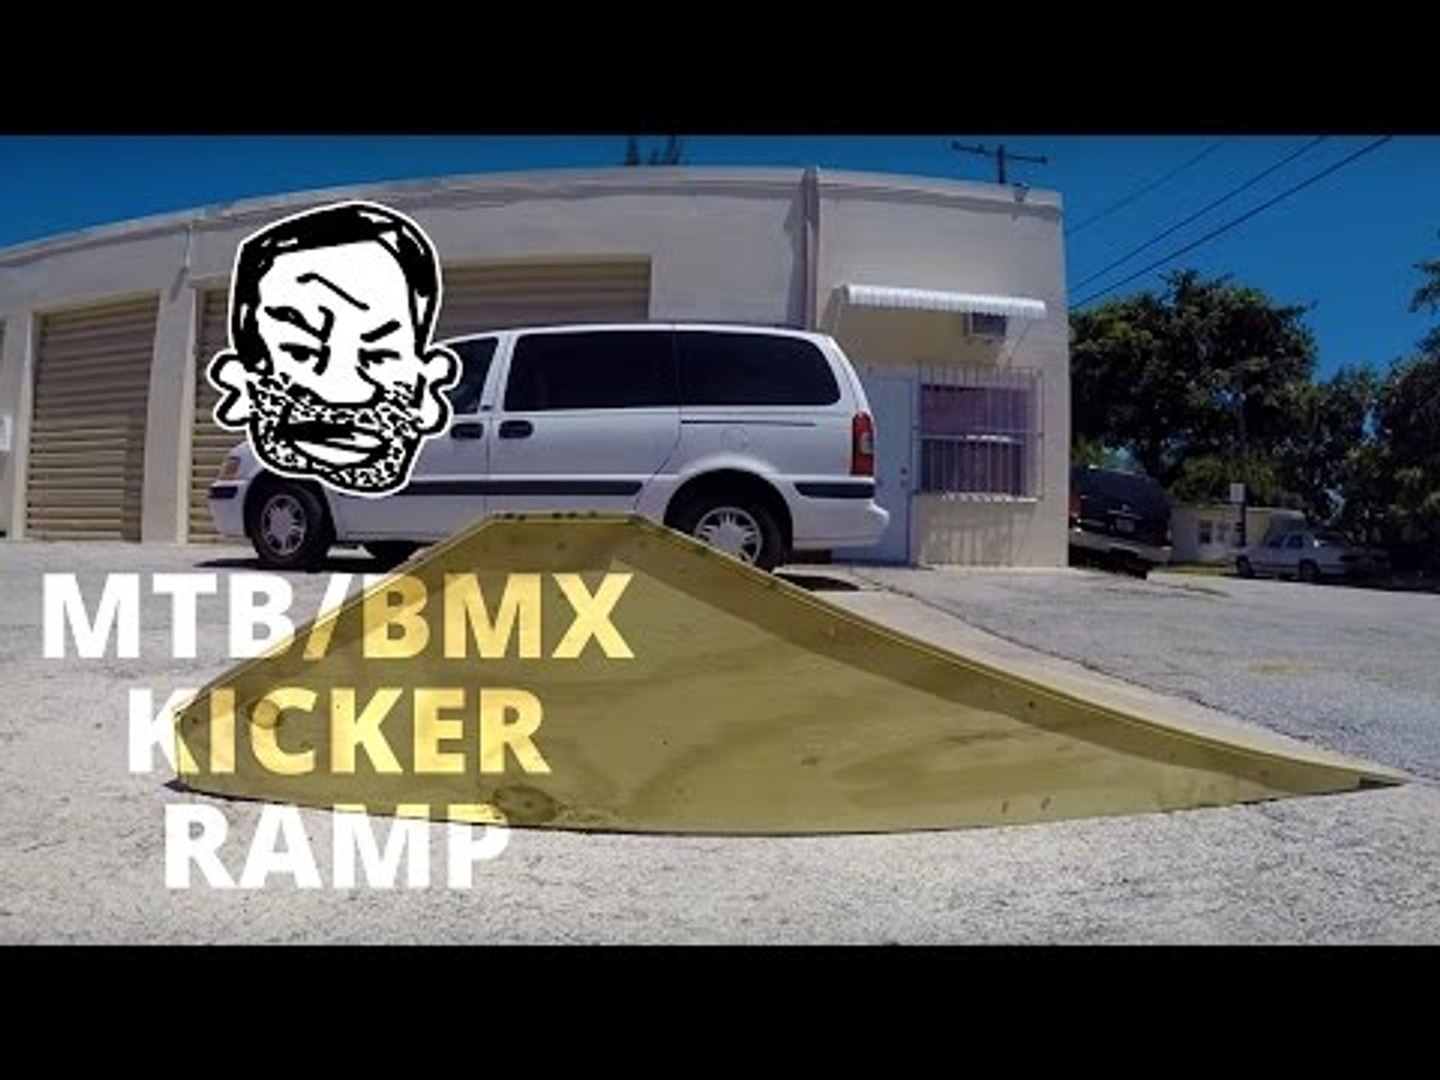 How to build a kicker ramp for BMX or MTB - video Dailymotion